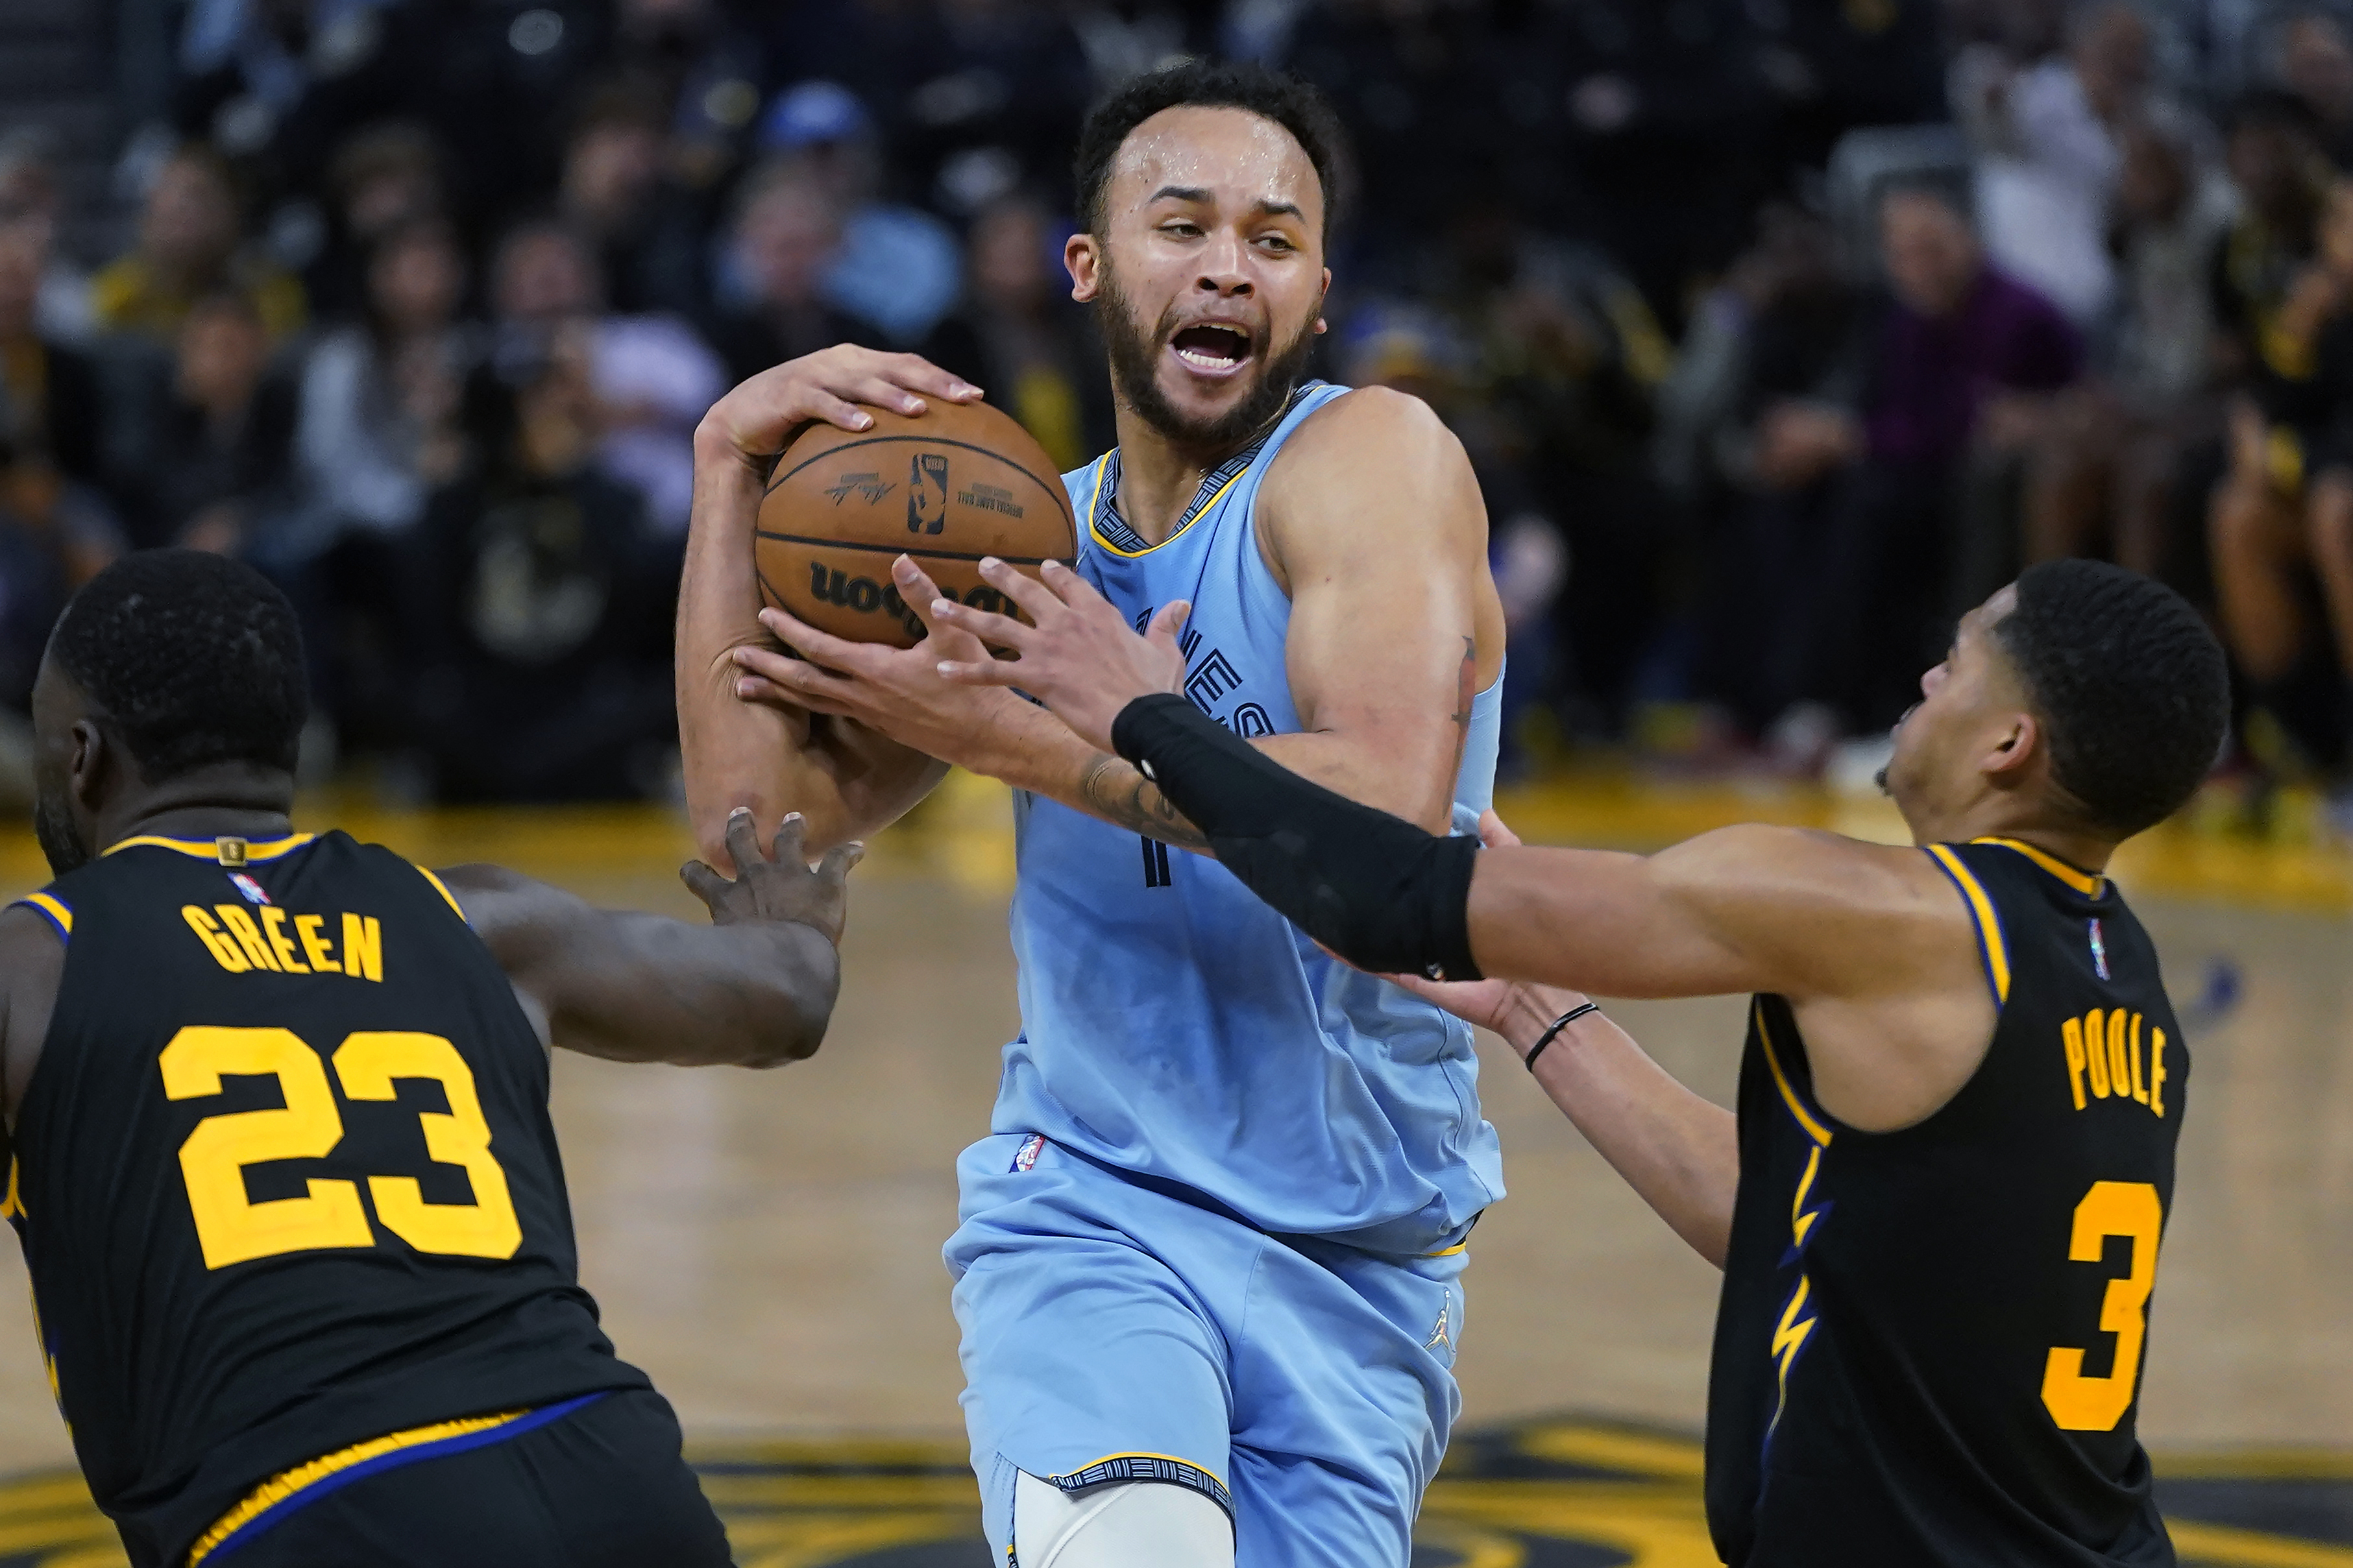 Stephen Curry, Klay Thompson lead Warriors past Grizzlies